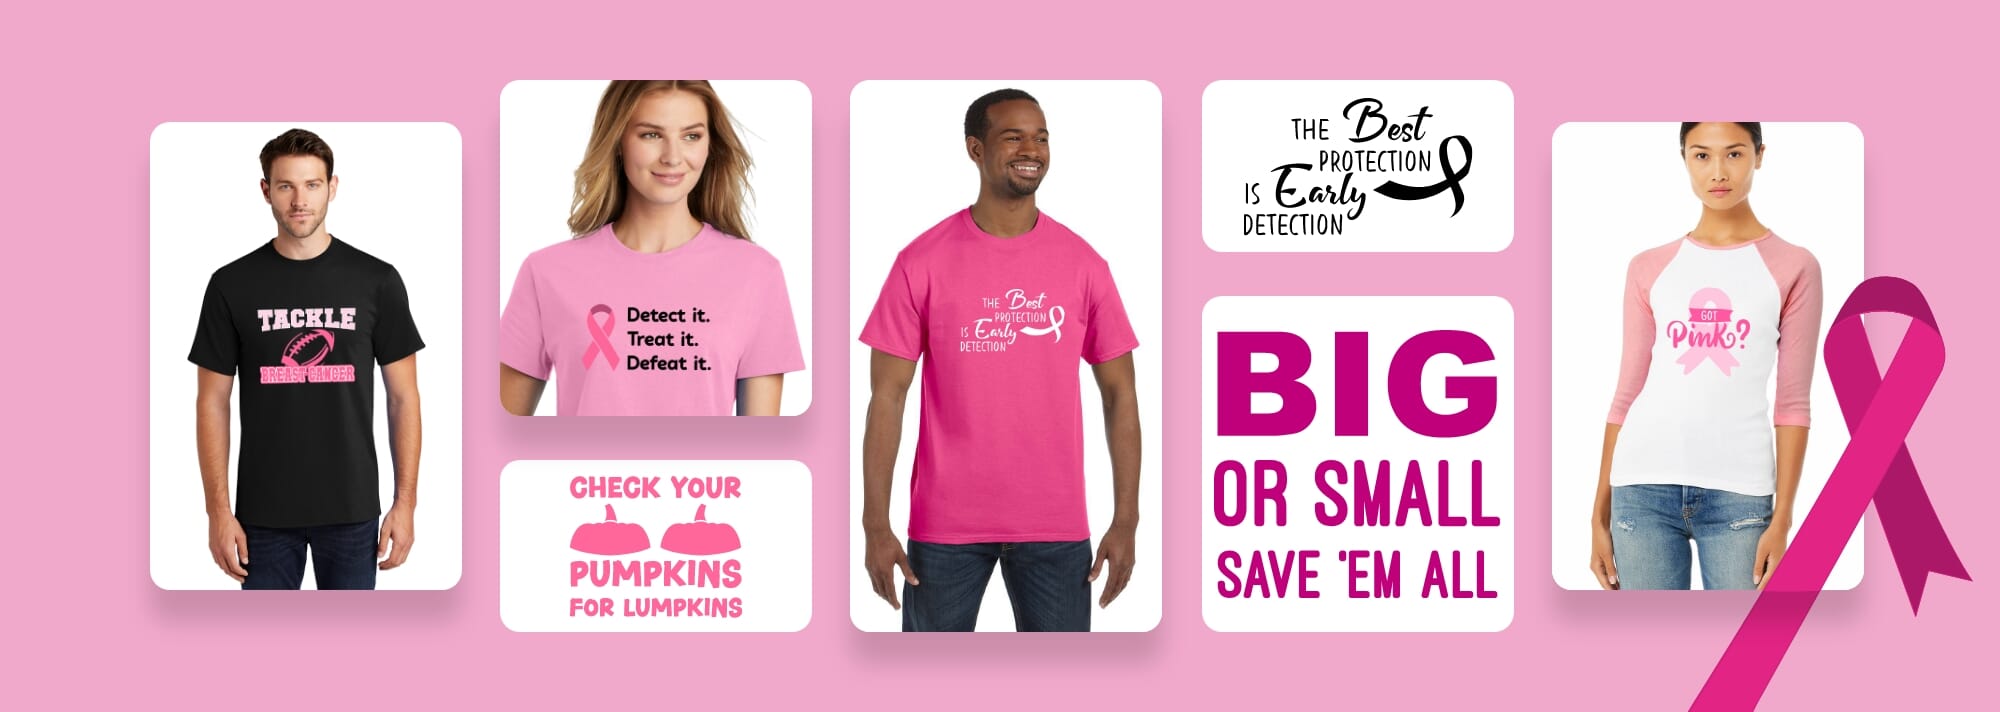 breast cancer awareness t-shirts